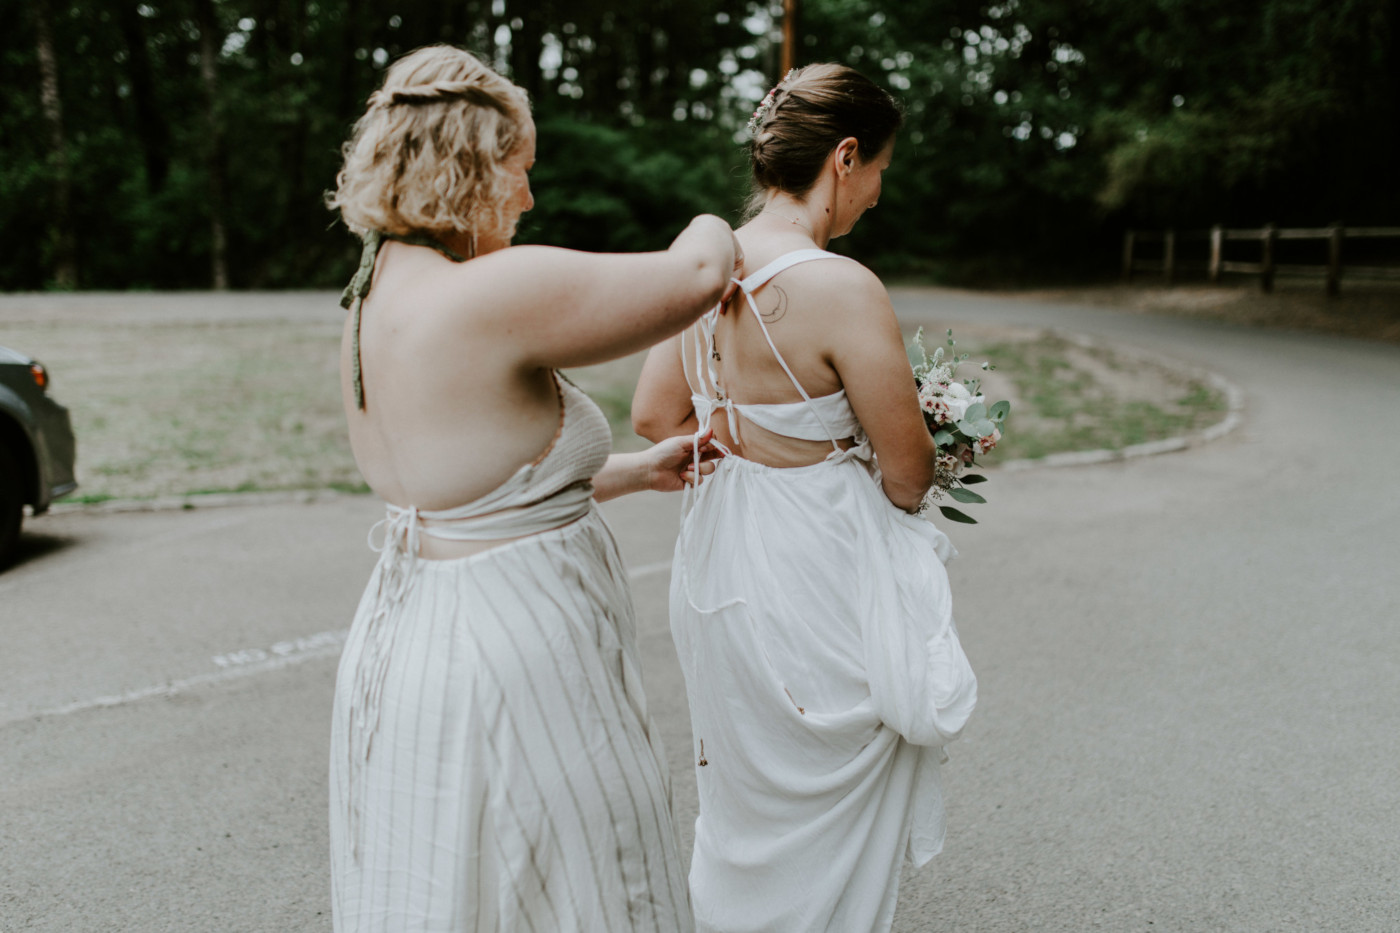 Kate helps Audrey fix up her dress. Elopement wedding photography at Bridal Veil Falls by Sienna Plus Josh.